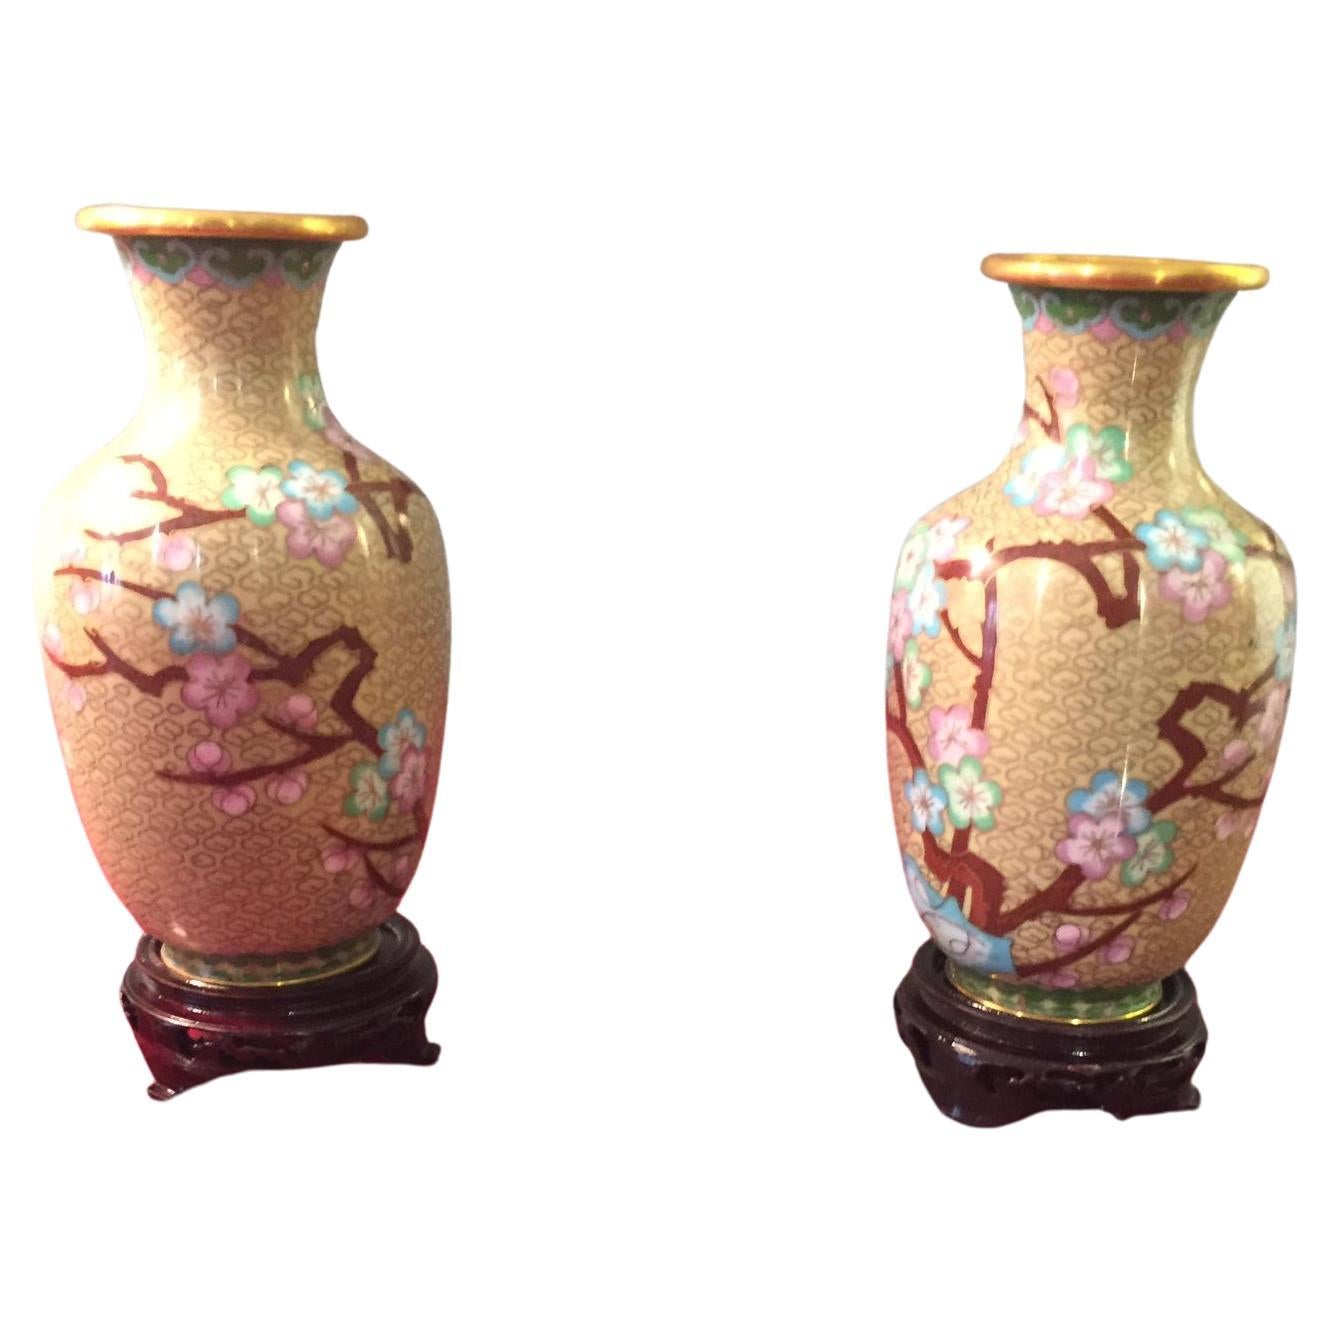 1920s Vases and Vessels